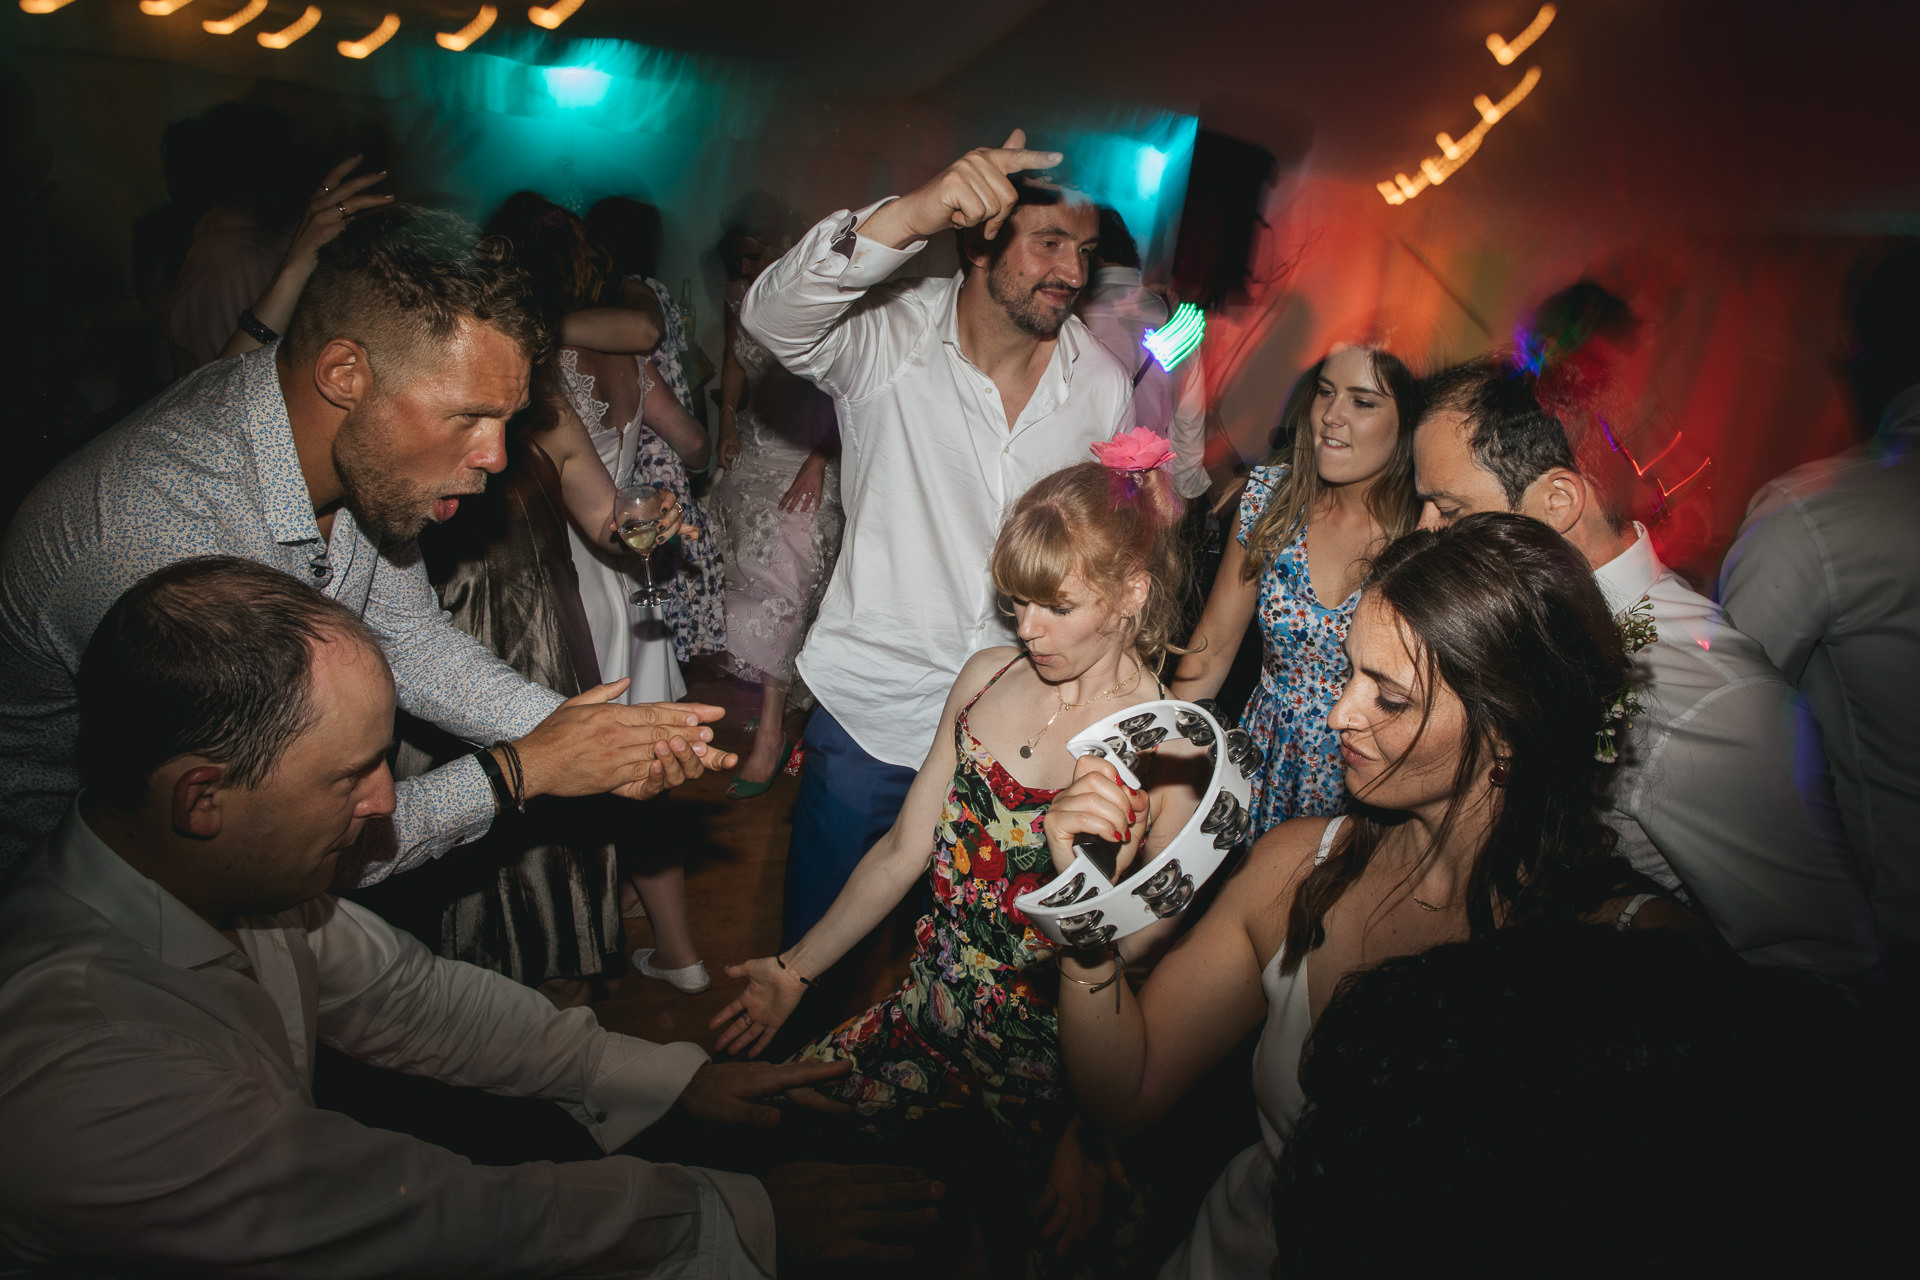 Wedding guests partying on the dance floor